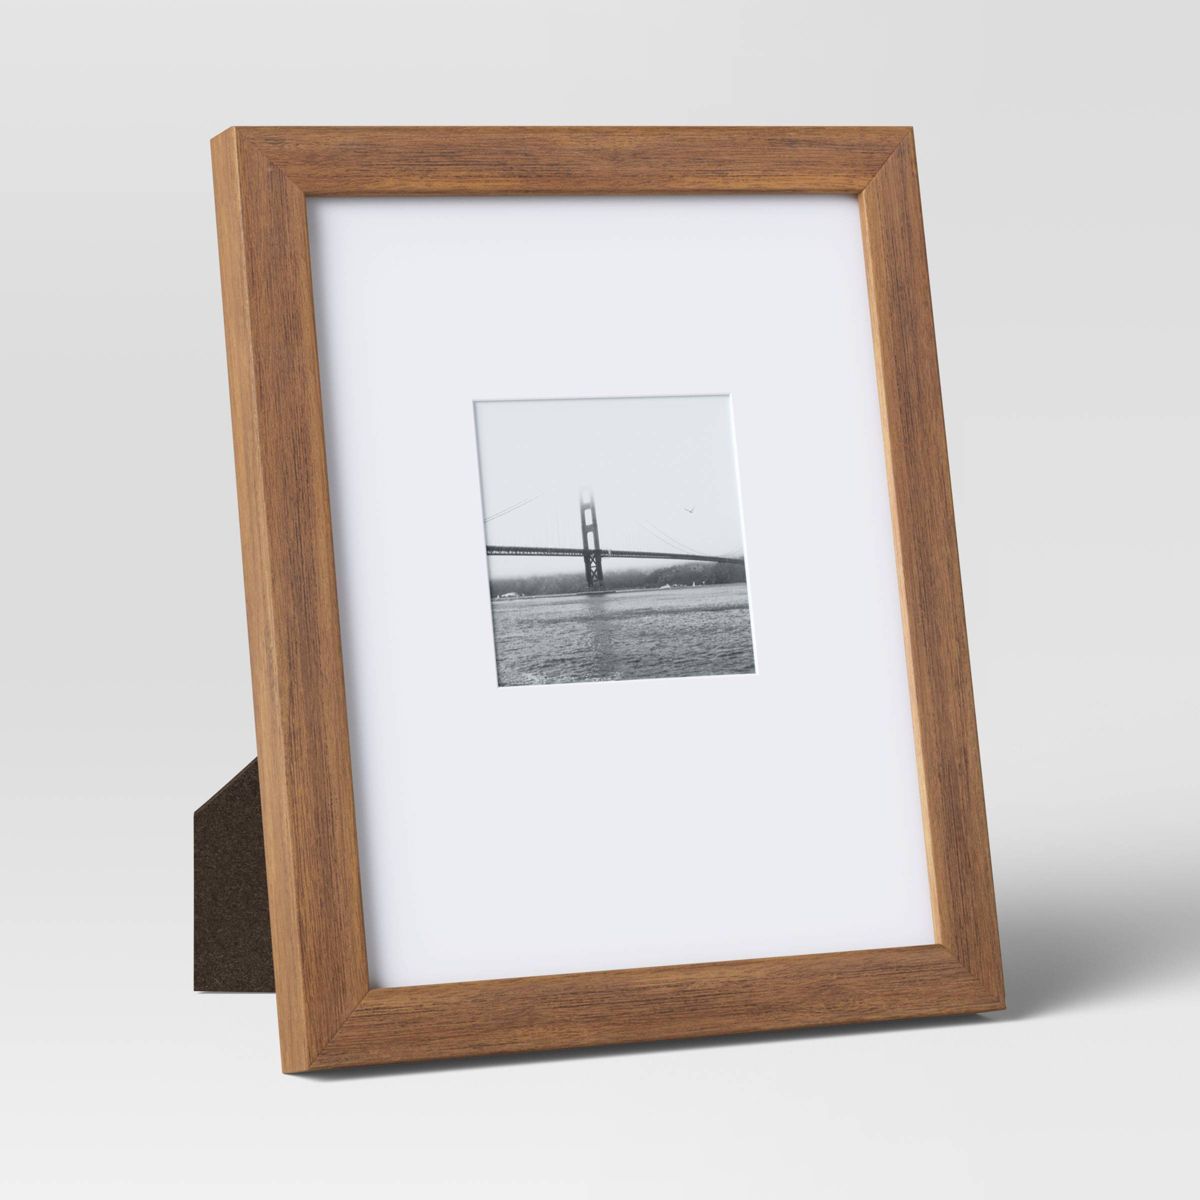 8" x 10" Matted to 4" x 4" Mid Tone Wood Single Image Frame Brown - Threshold™ | Target